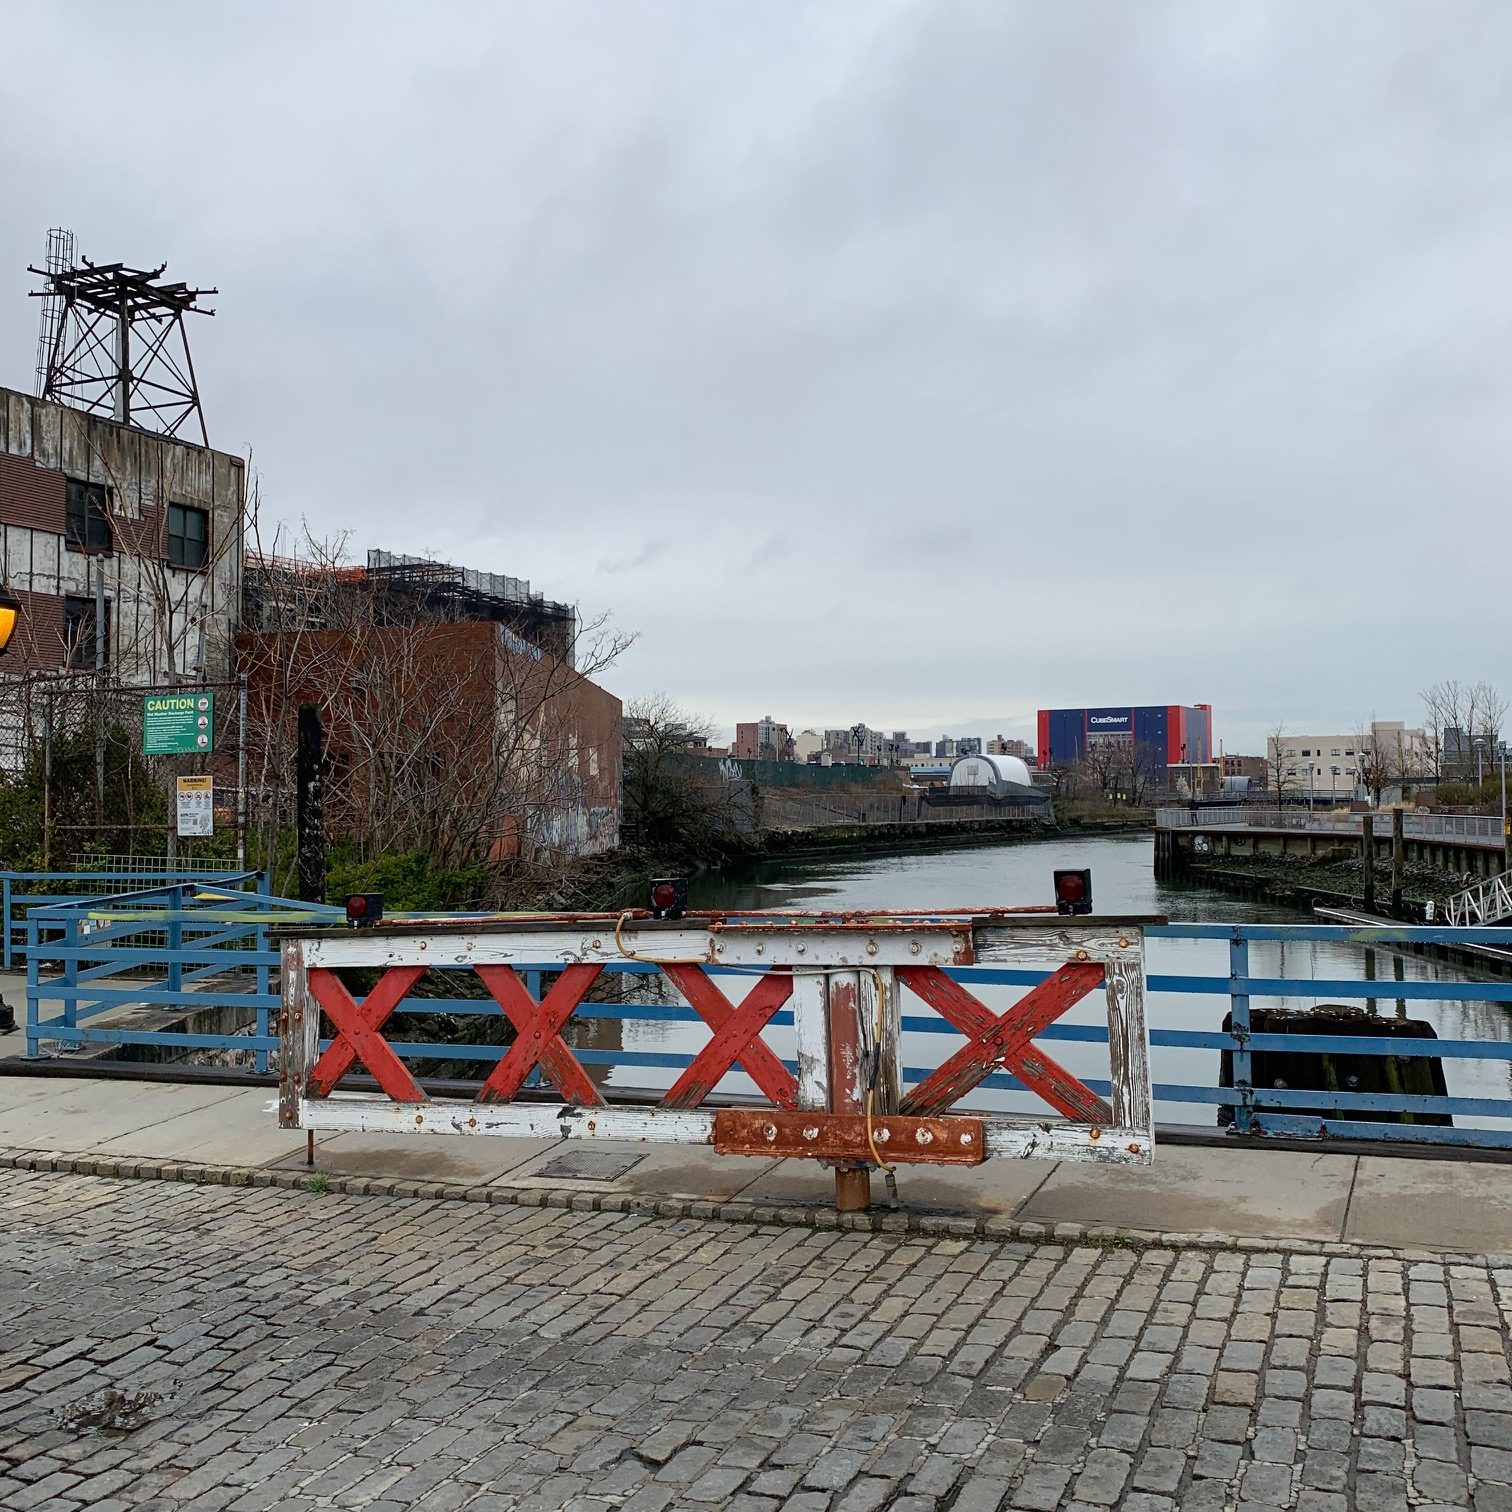 Public Life During Social Distancing in Gowanus, Brooklyn by Tony Maniscalco